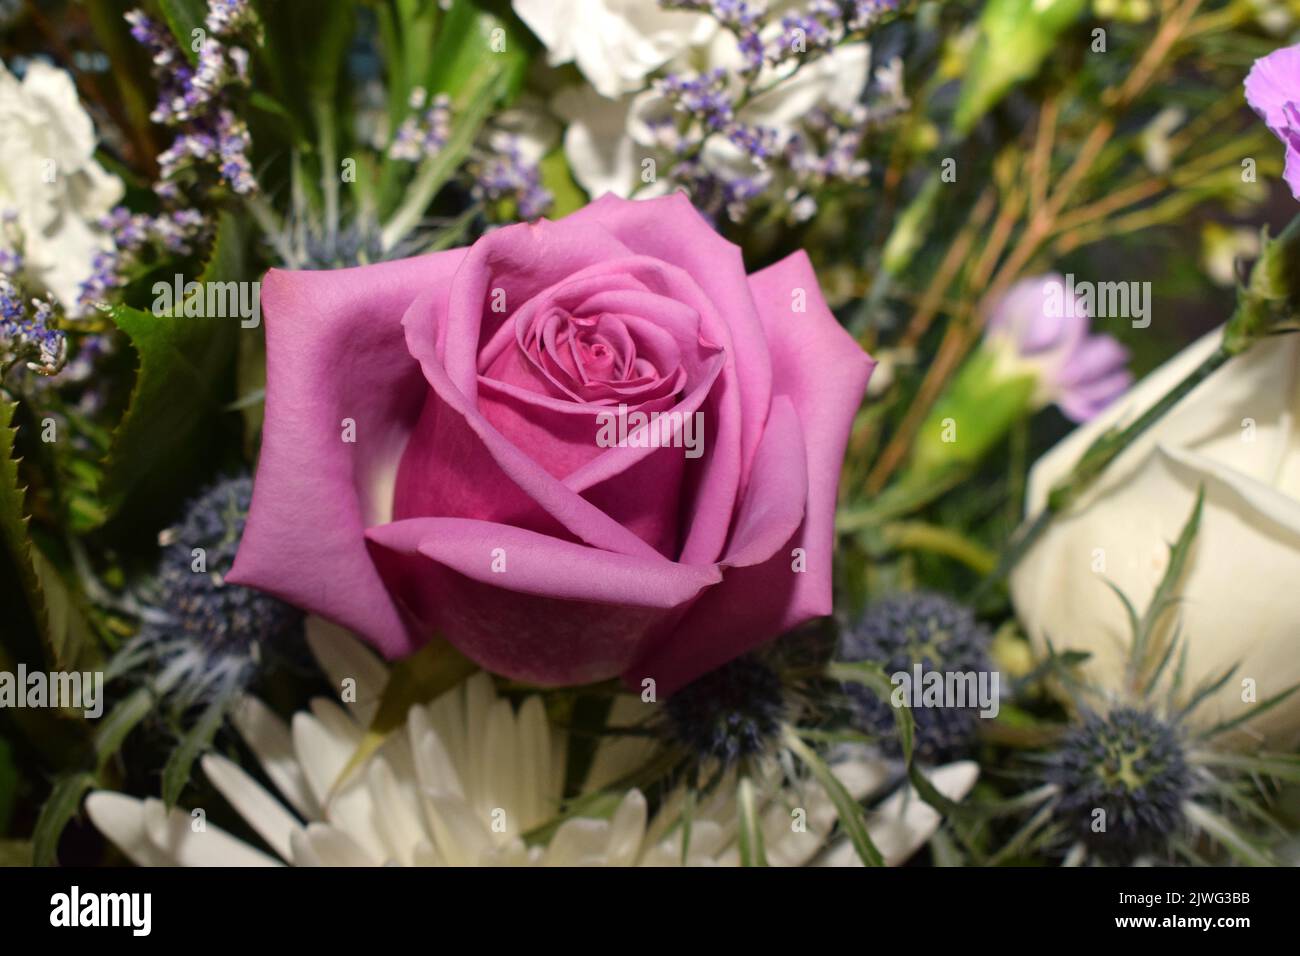 A close up of a rose in a sympathy bouquet Stock Photo